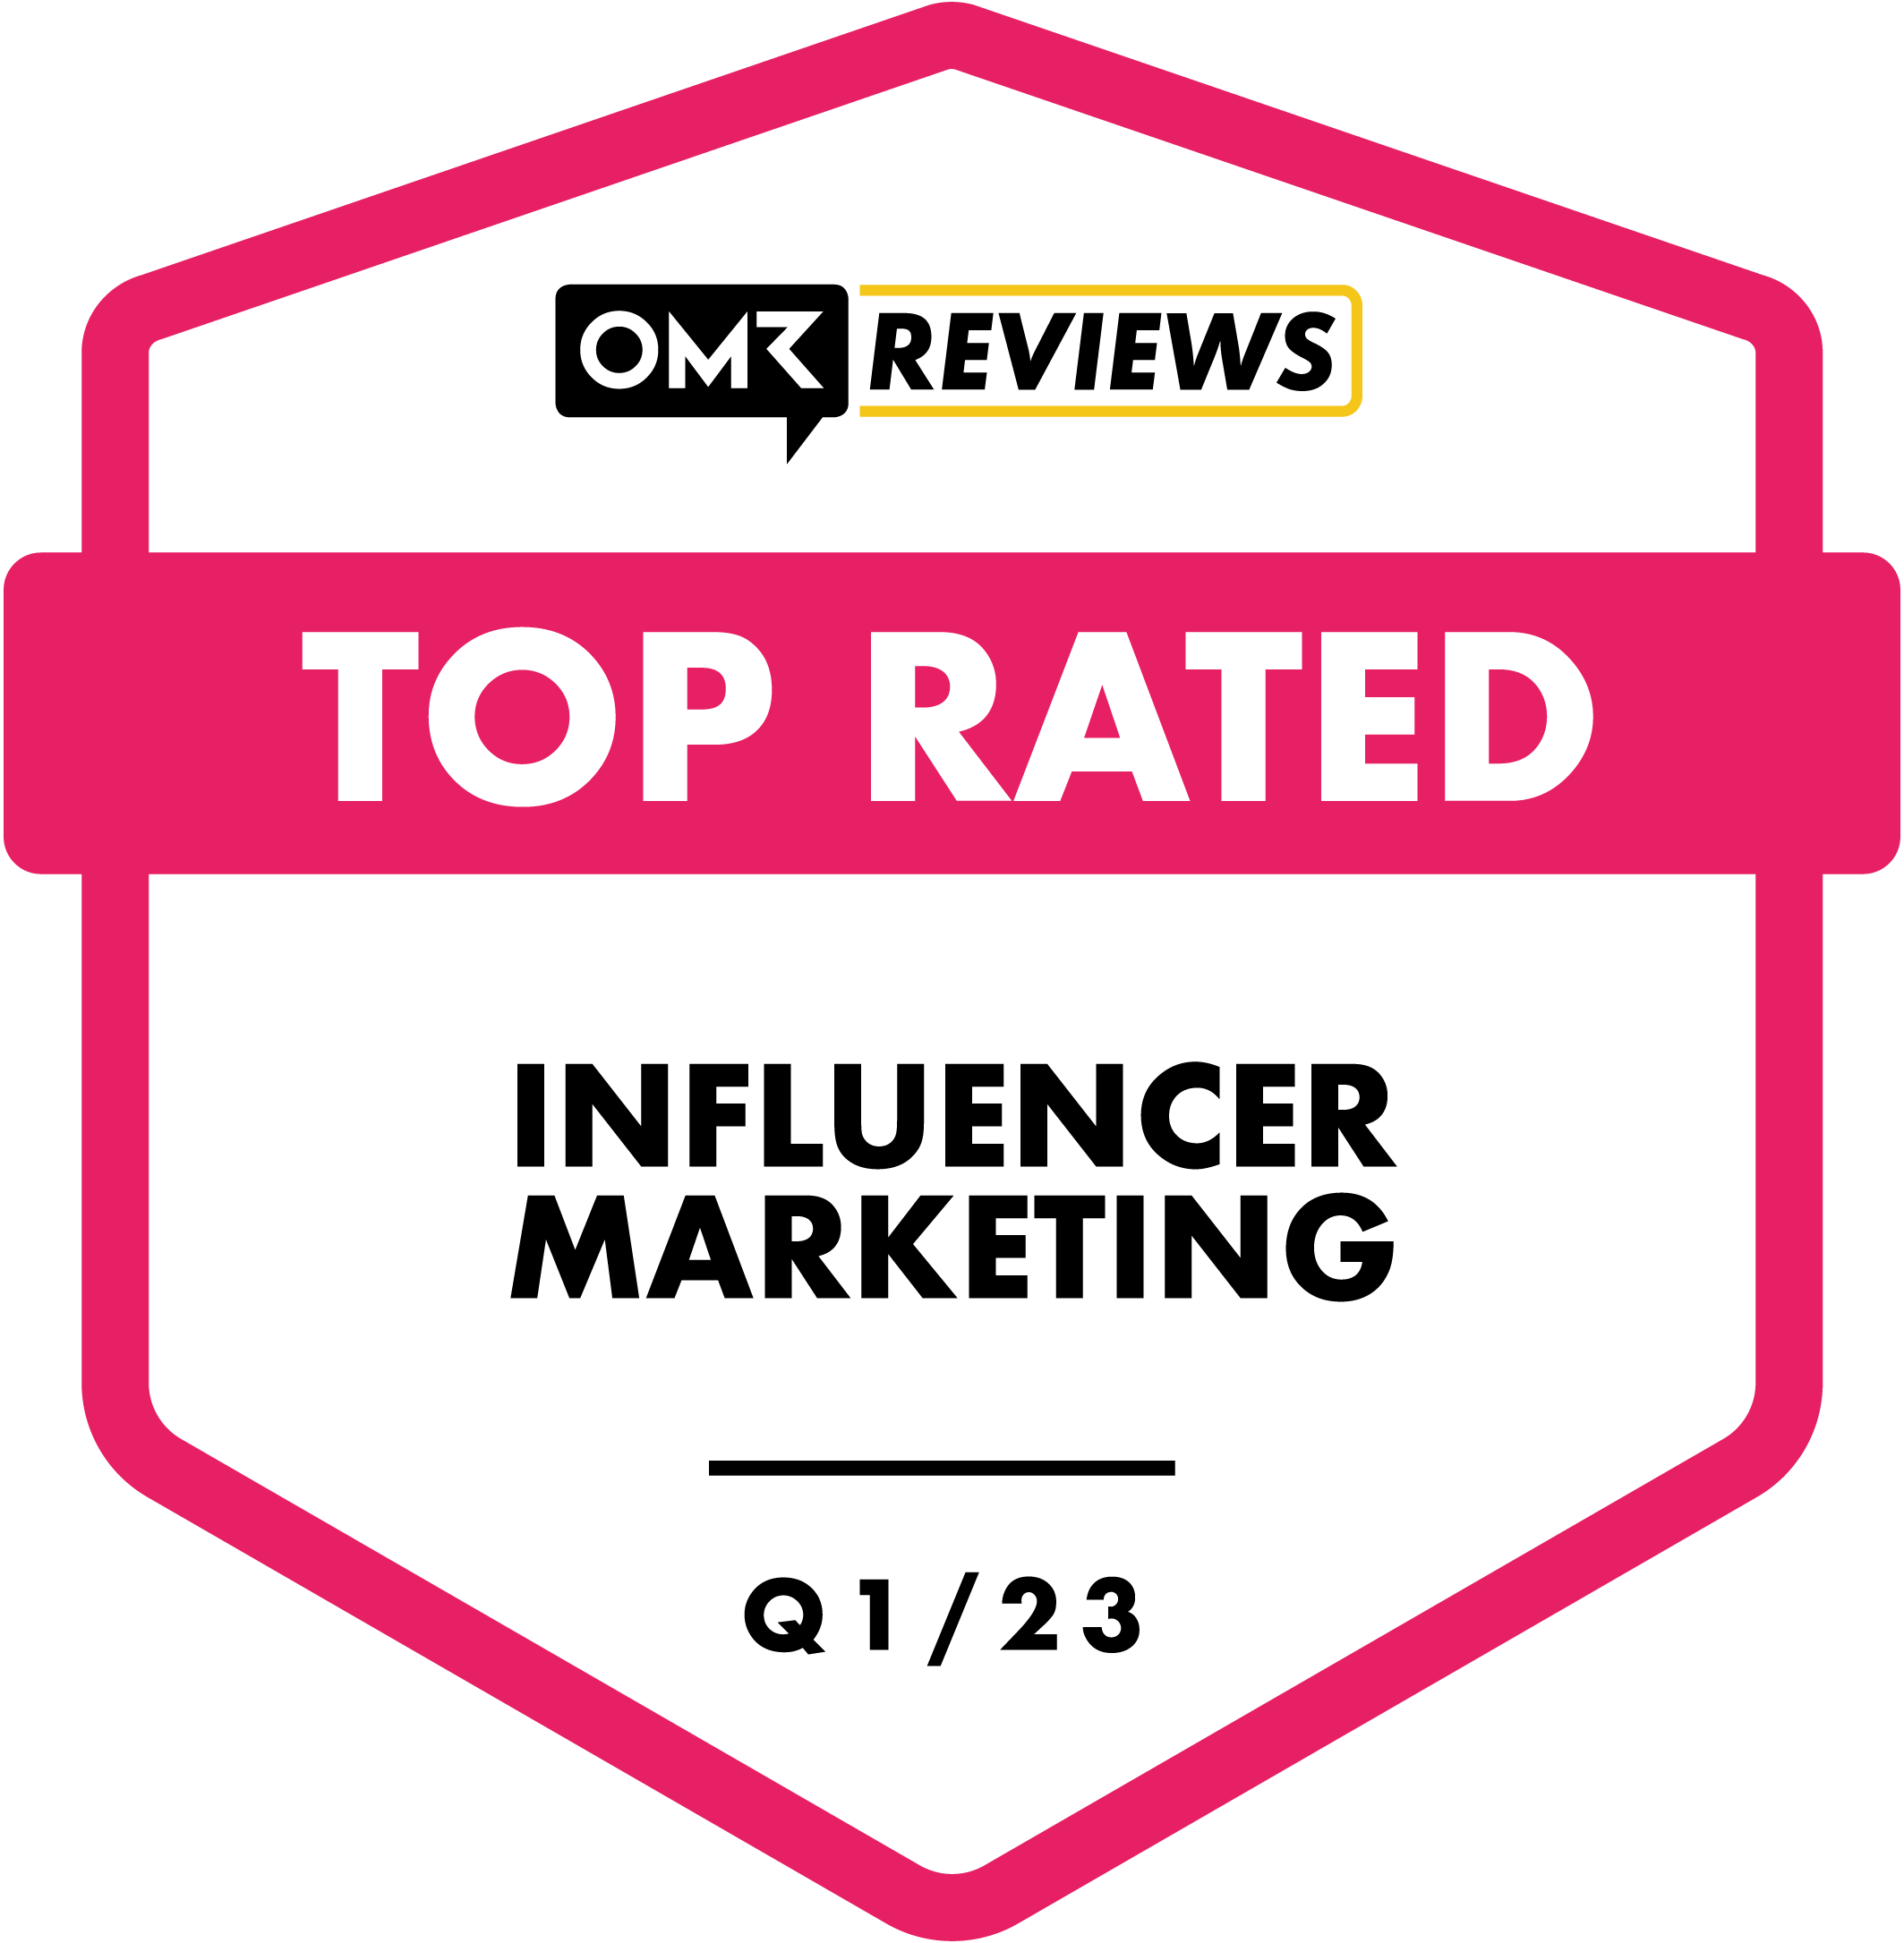 Top Rated Influencer Marketing Tool Badge by OMR Q1 2023